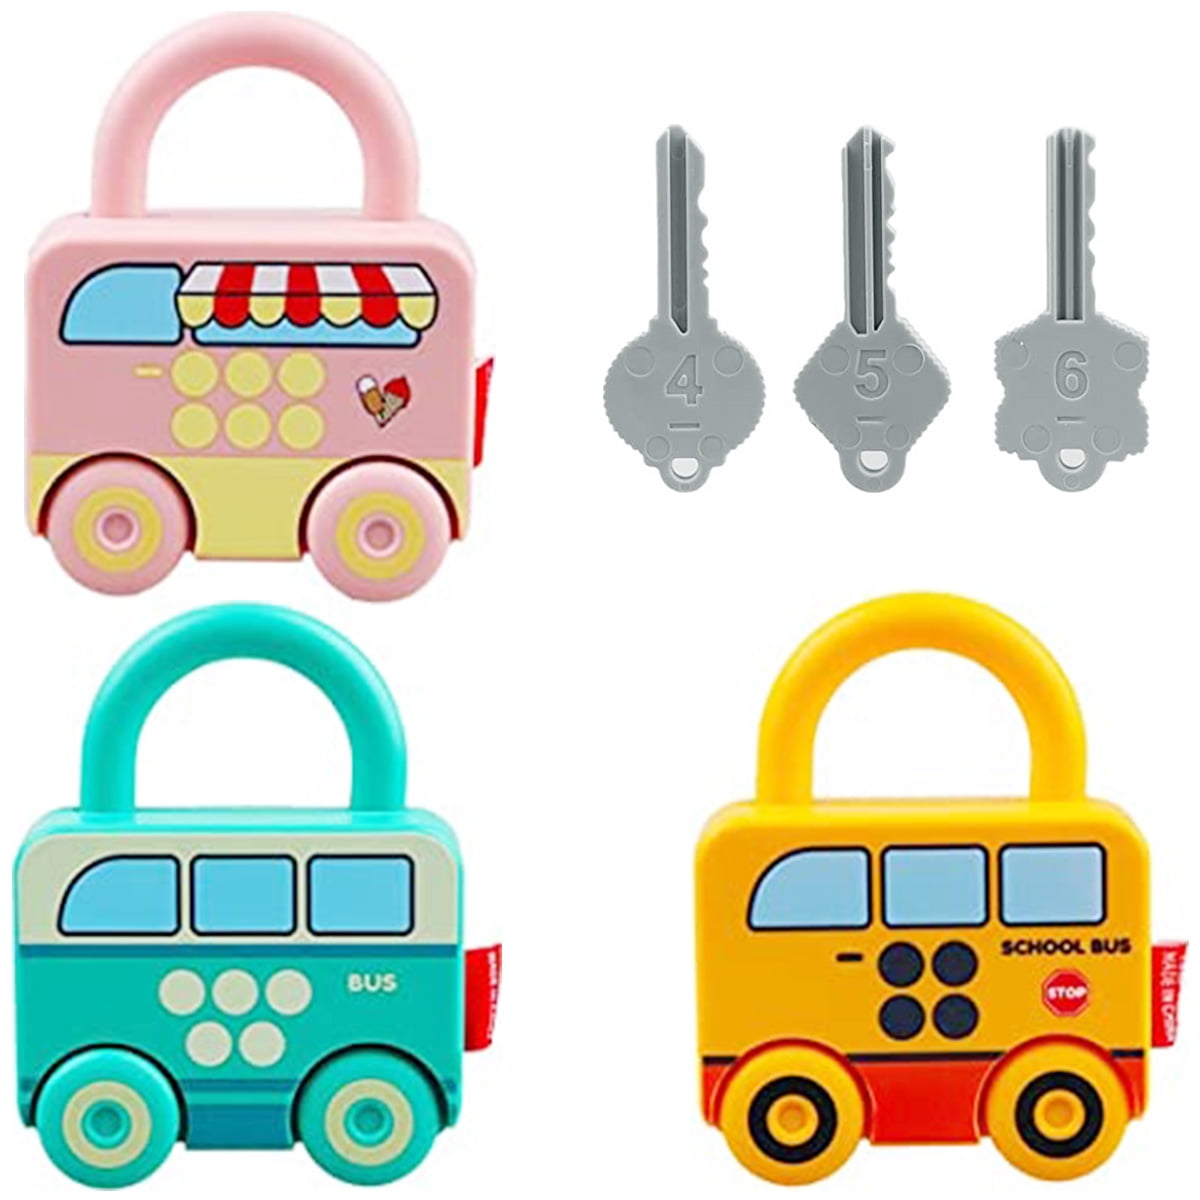 Lock Key Lock Toys Brain Games Party Training Gifts Family Unlock Puzzle Toy LA 